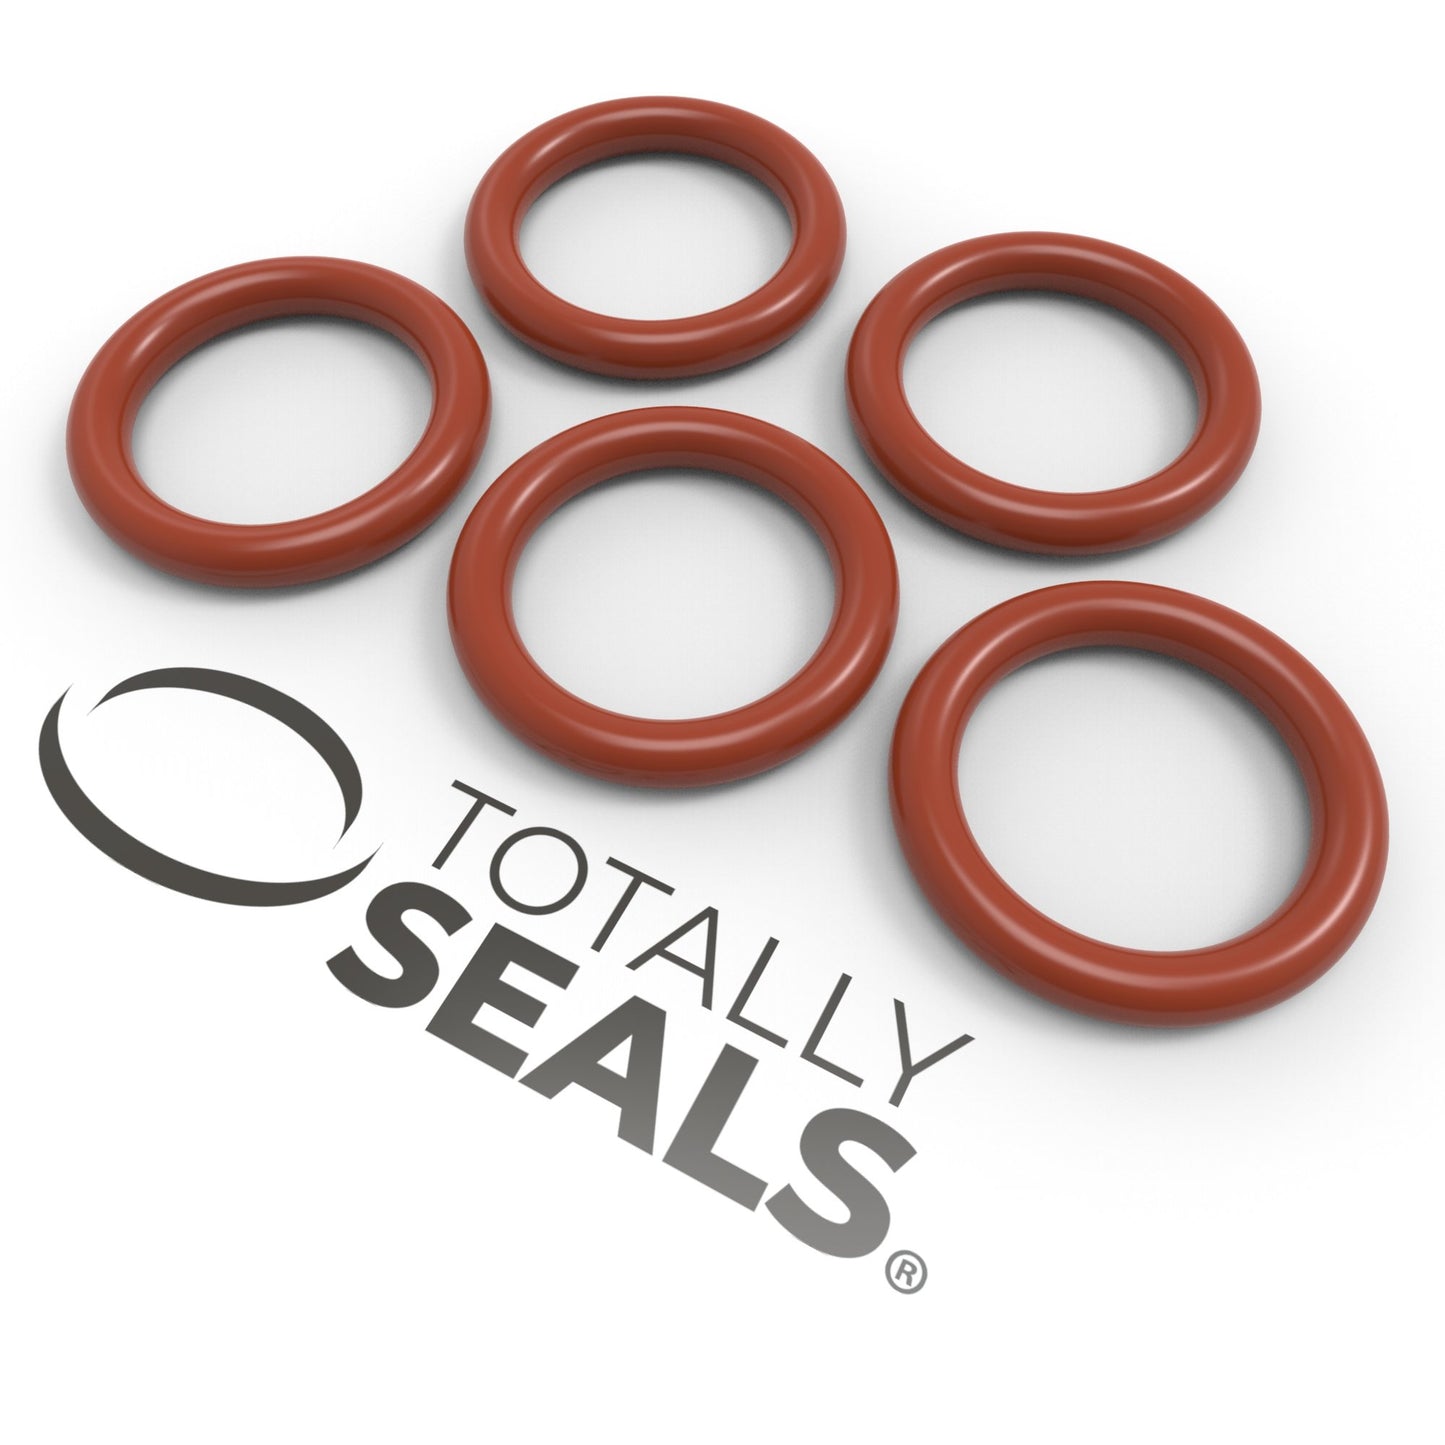 6mm x 3mm (12mm OD) Silicone O-Rings - Totally Seals®